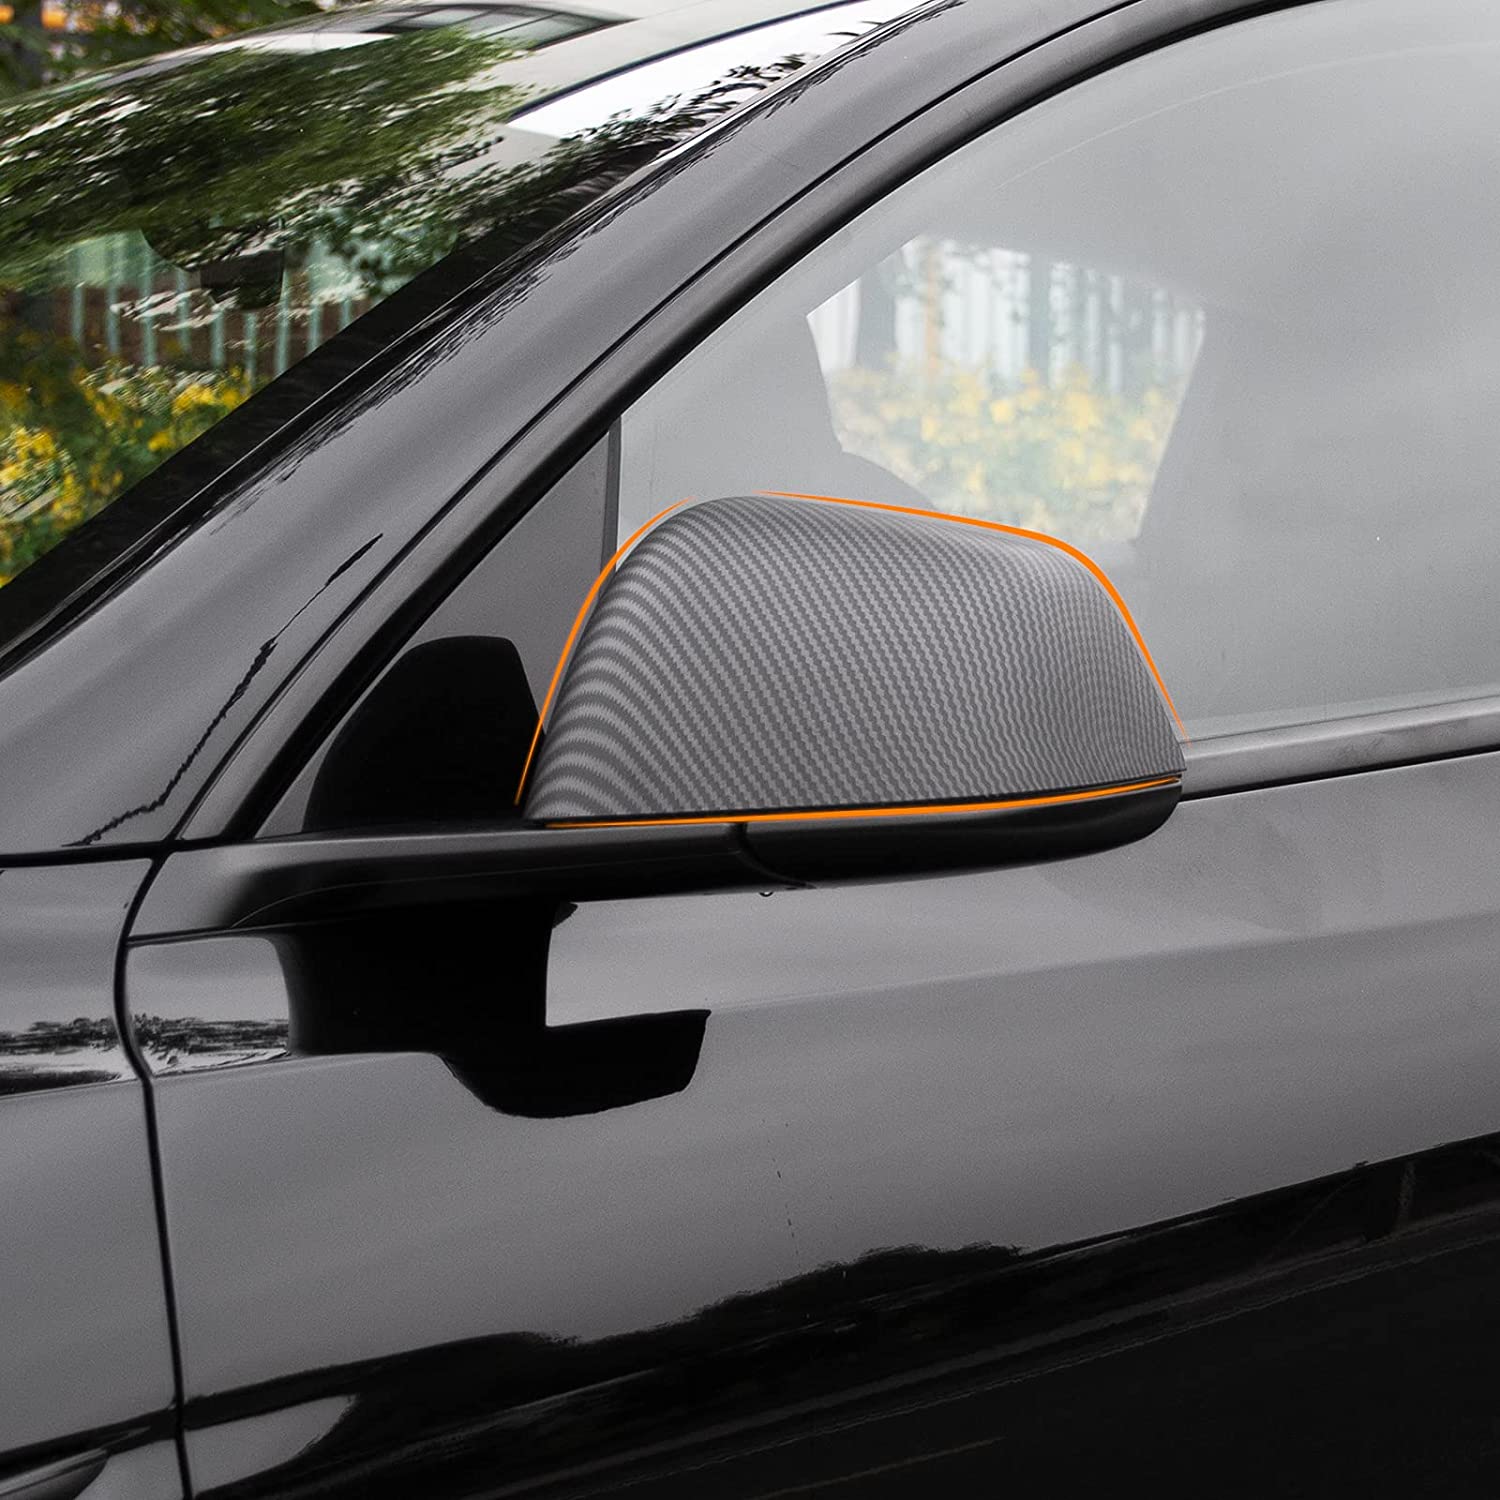 ABS Mirror Cover for Tesla Model Y 2020-2024 - Tesery Official Store